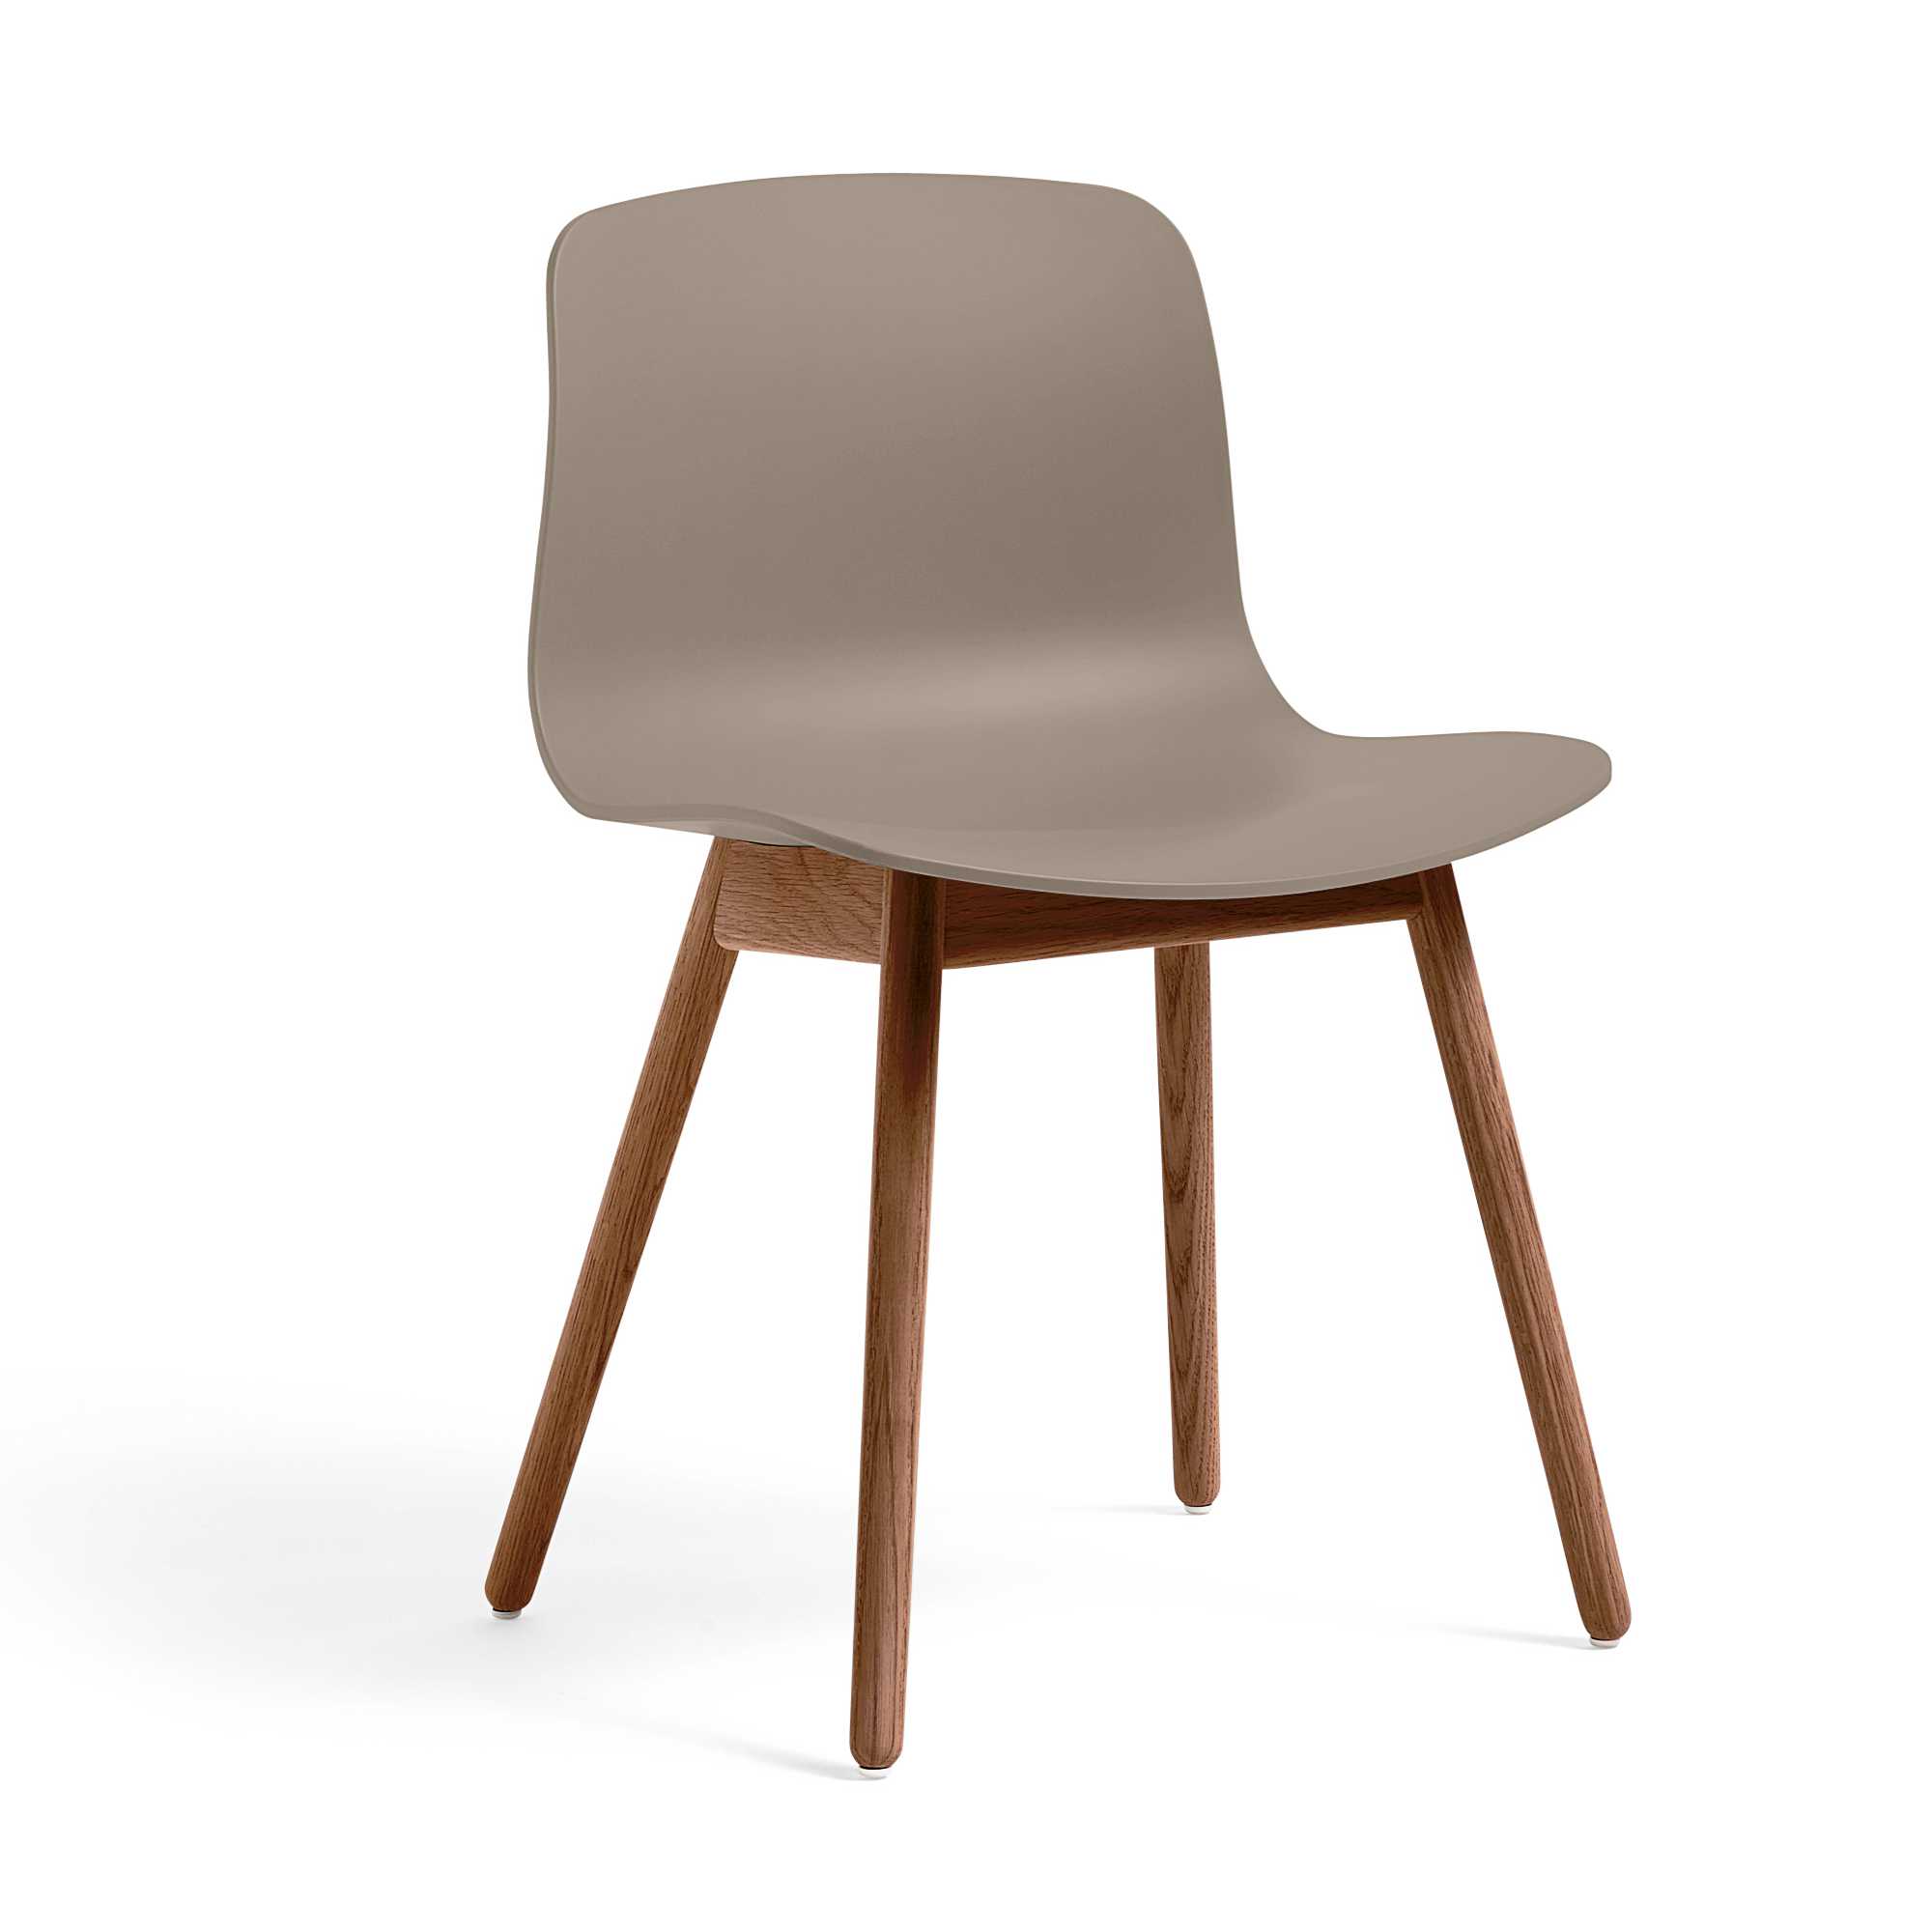 Hay AAC 12 Chair, Khaki/Lacquered Solid Walnut